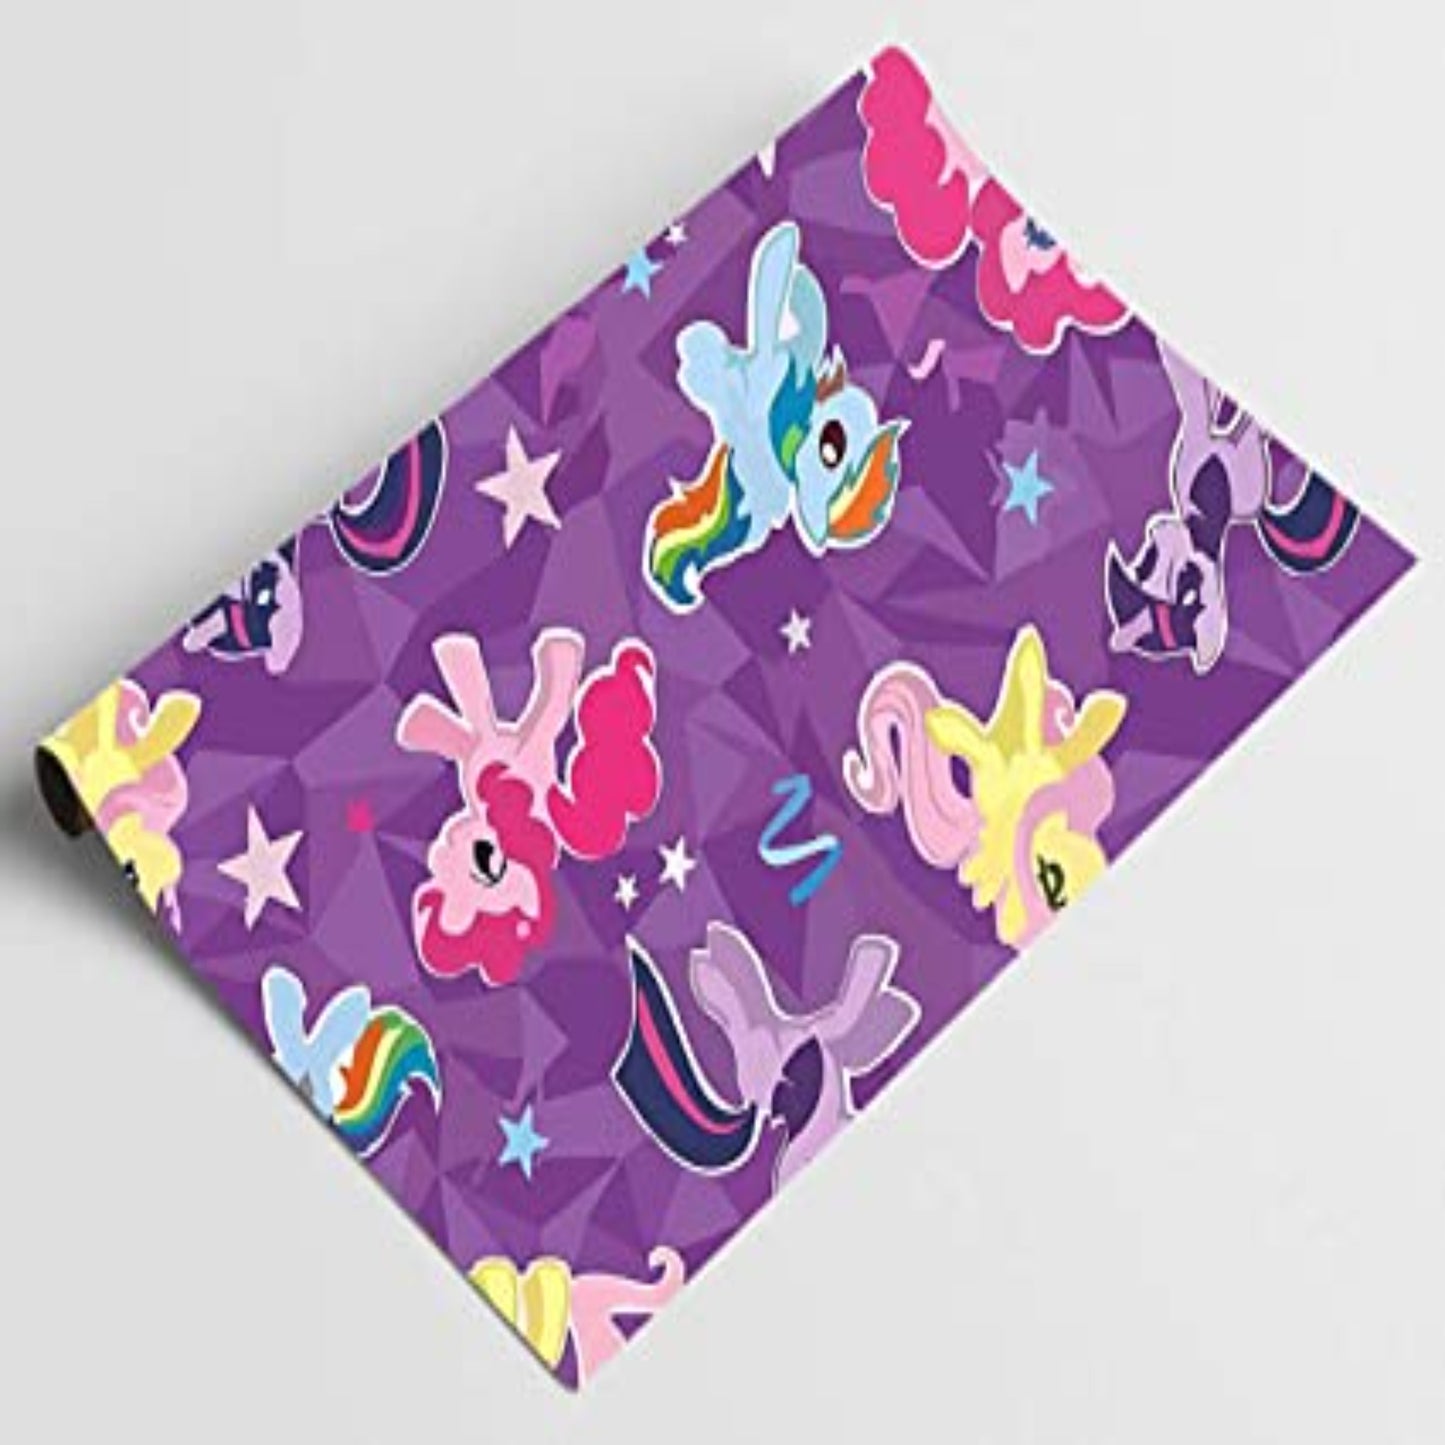 Accuprints | Design Peppa Pig | Size 20 X 30 inch | Wrapping Paper Sheets for Birthday Gift